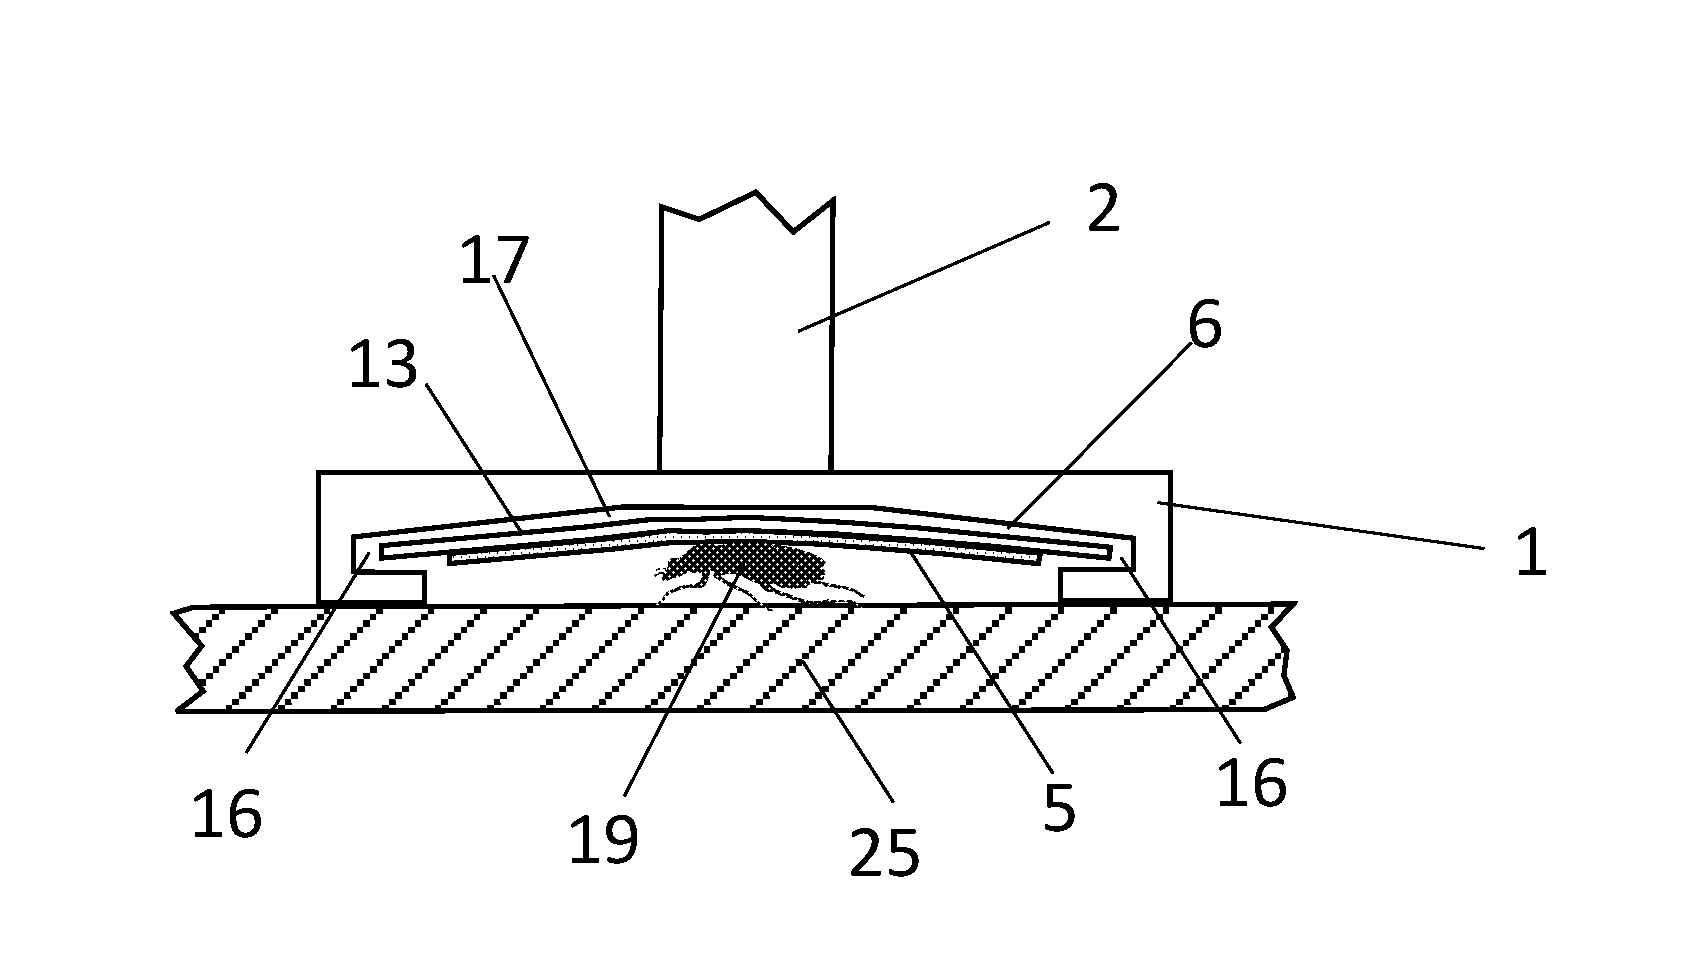 Insect capture device and system